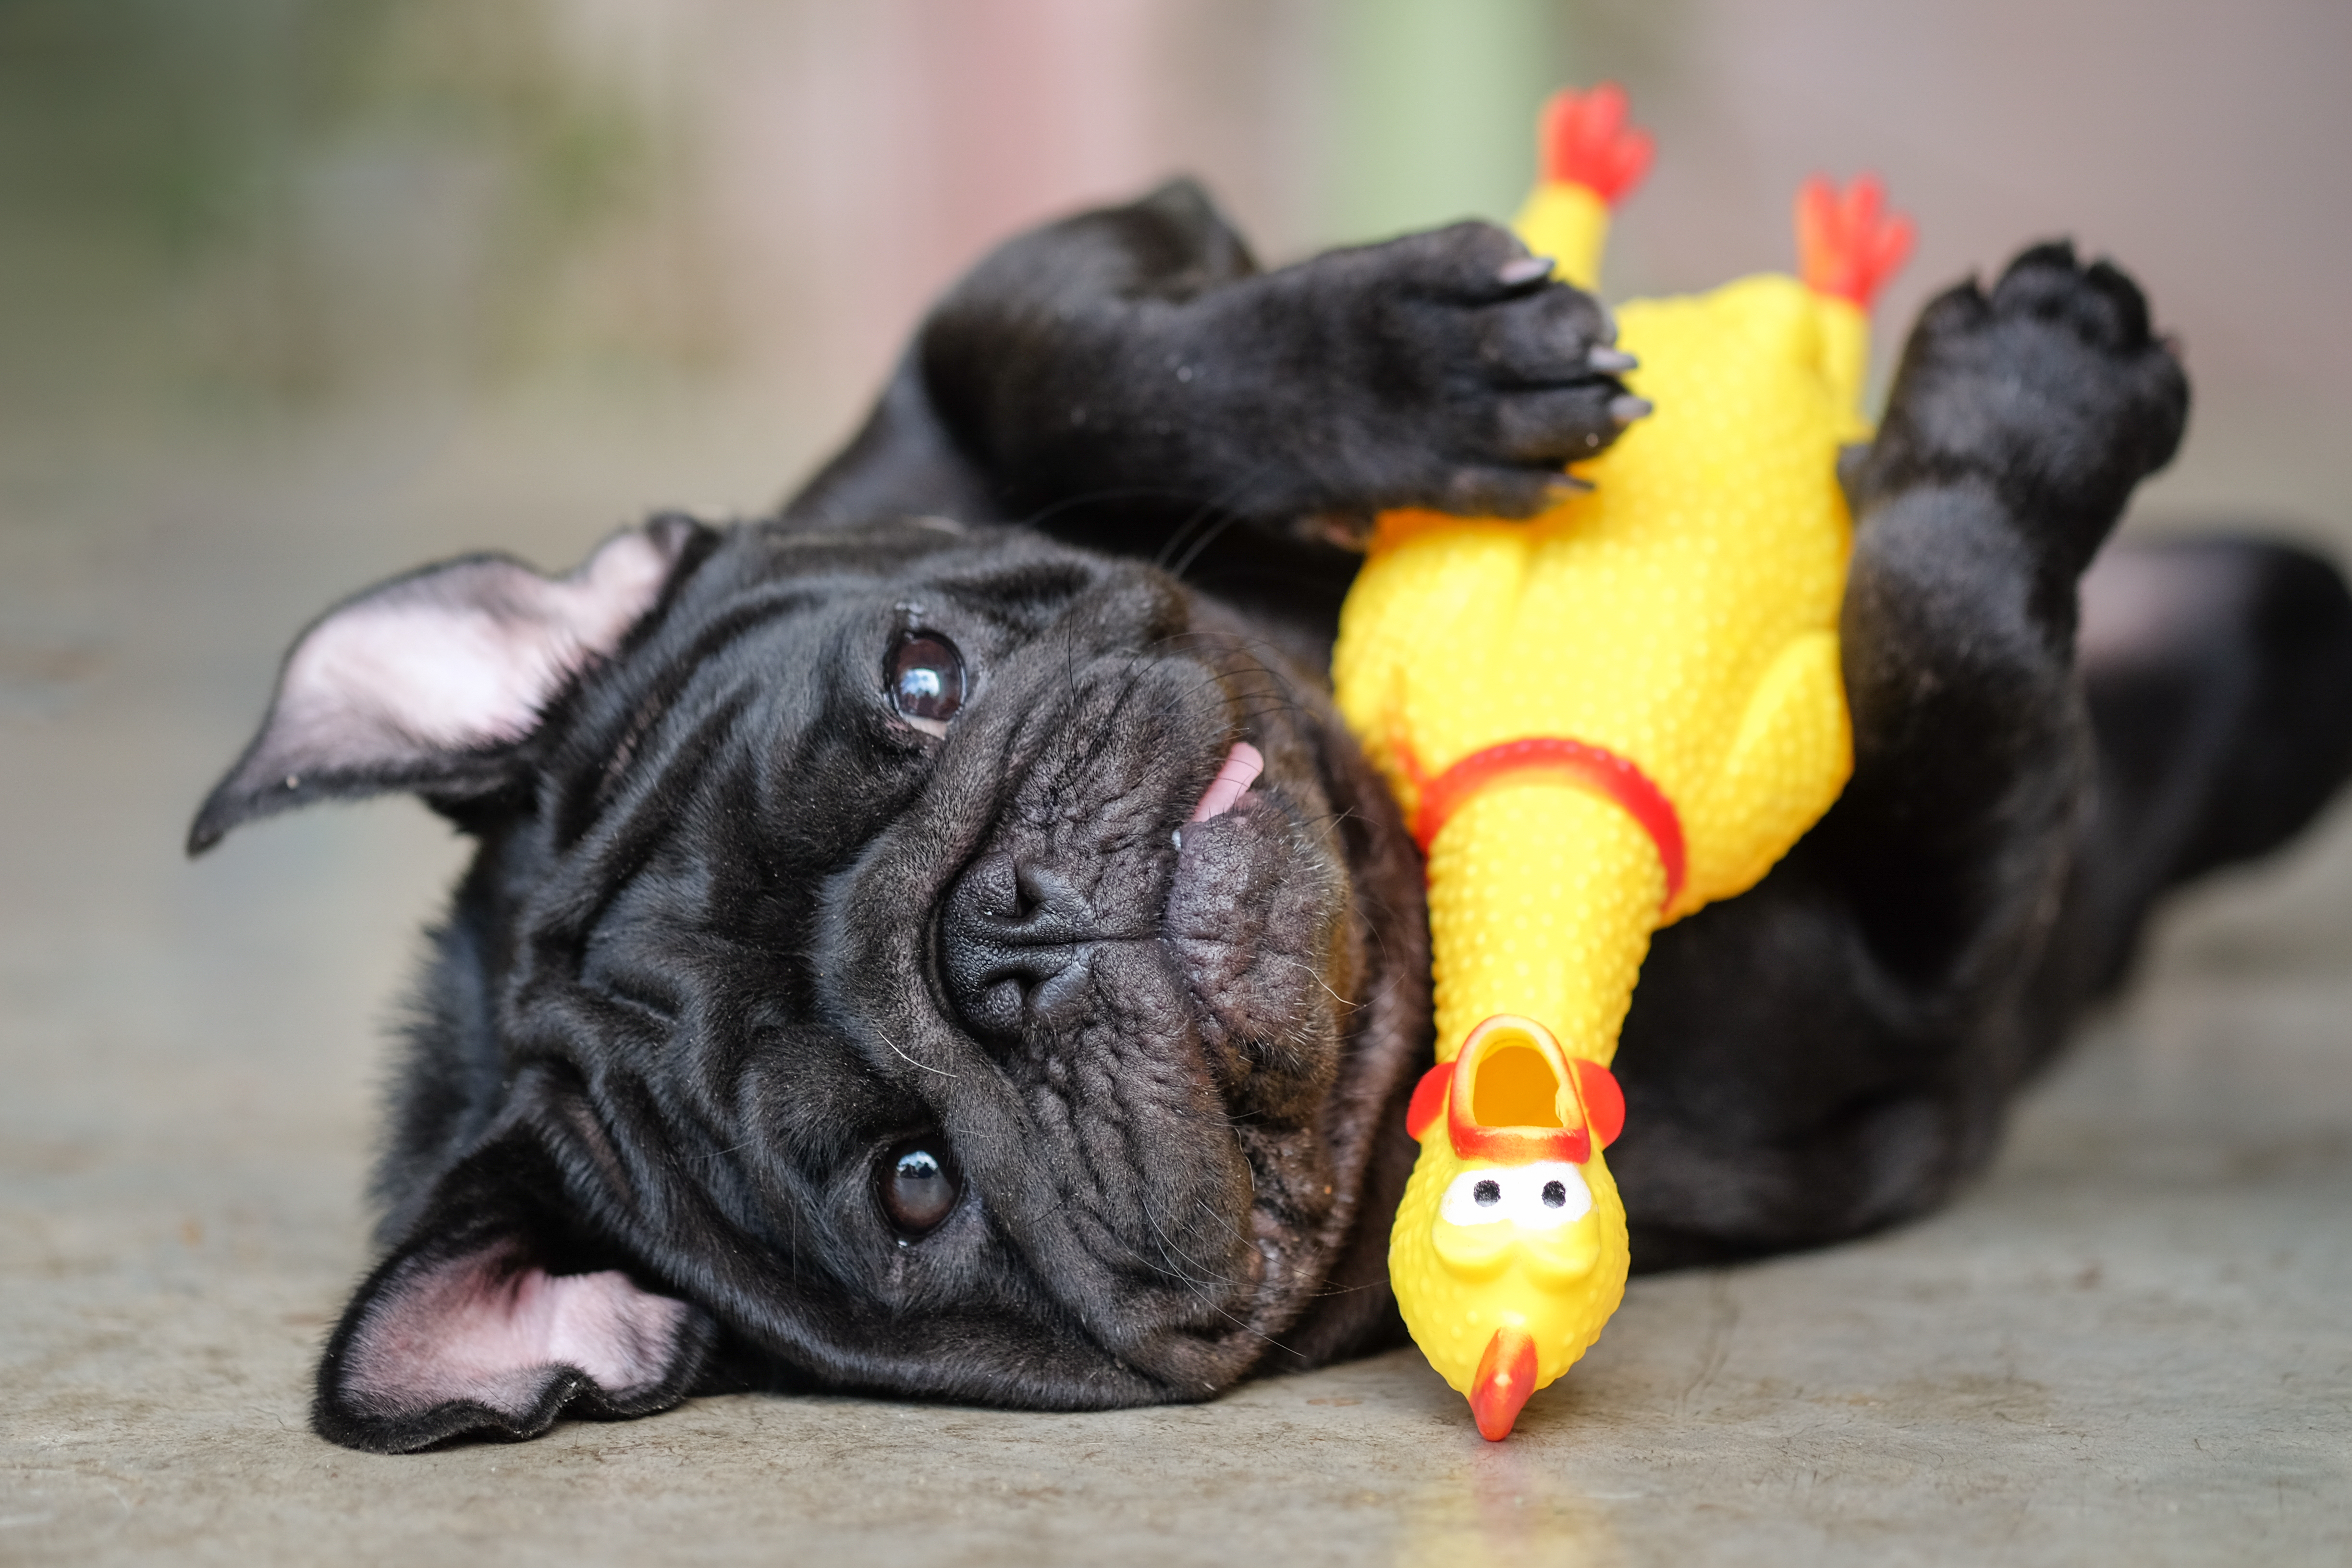 Black Pug With Yellow Rubber Chicken Toy